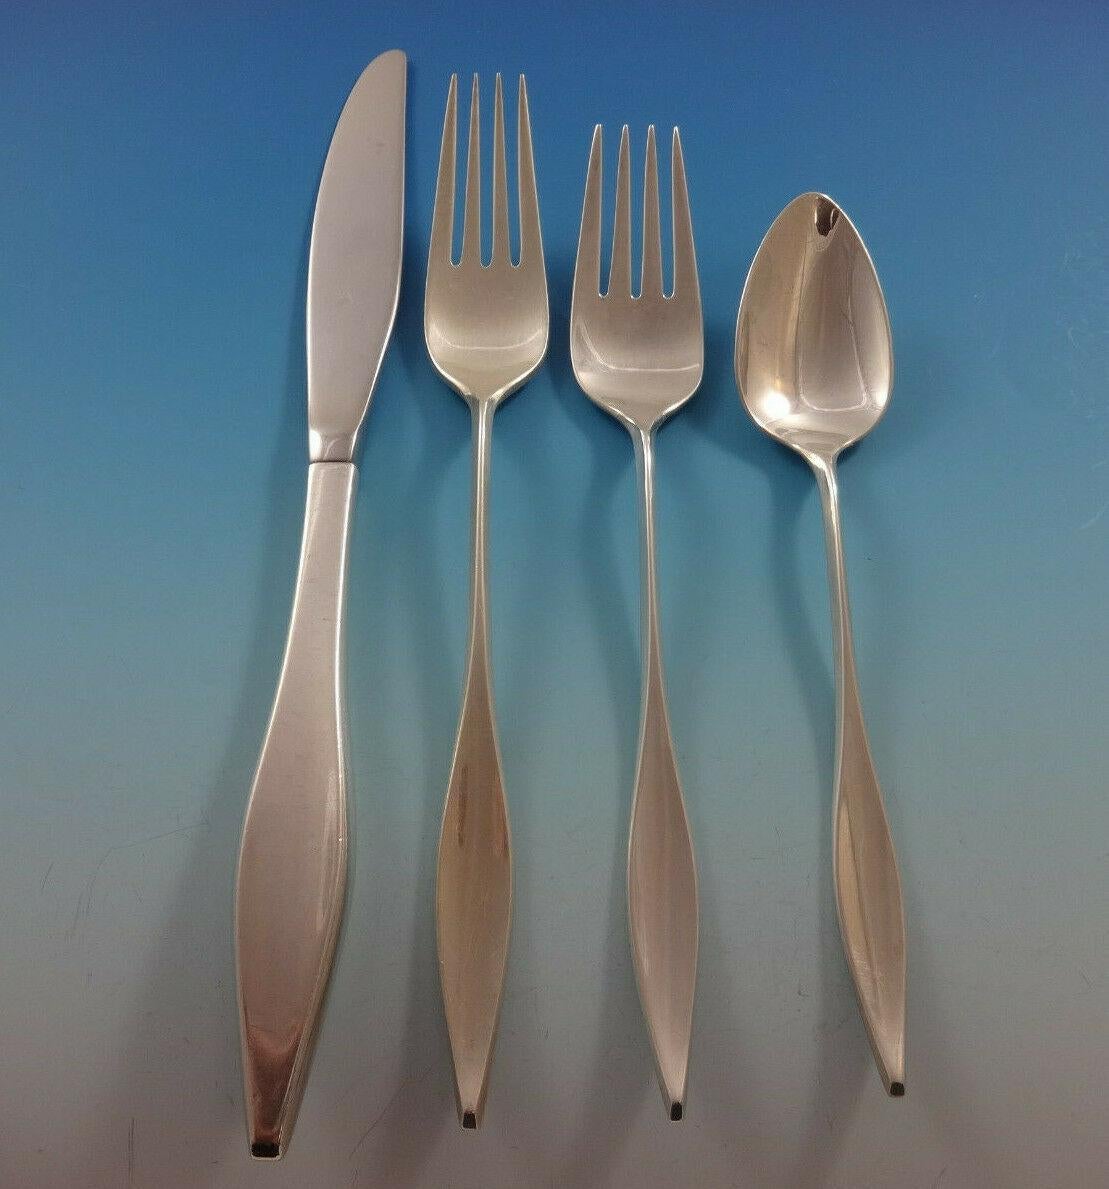 Monumental Mid-Century Modern lark by Reed & Barton sterling silver Flatware set - 115 pieces. Designed by John Prip. This set includes:

18 knives, 9